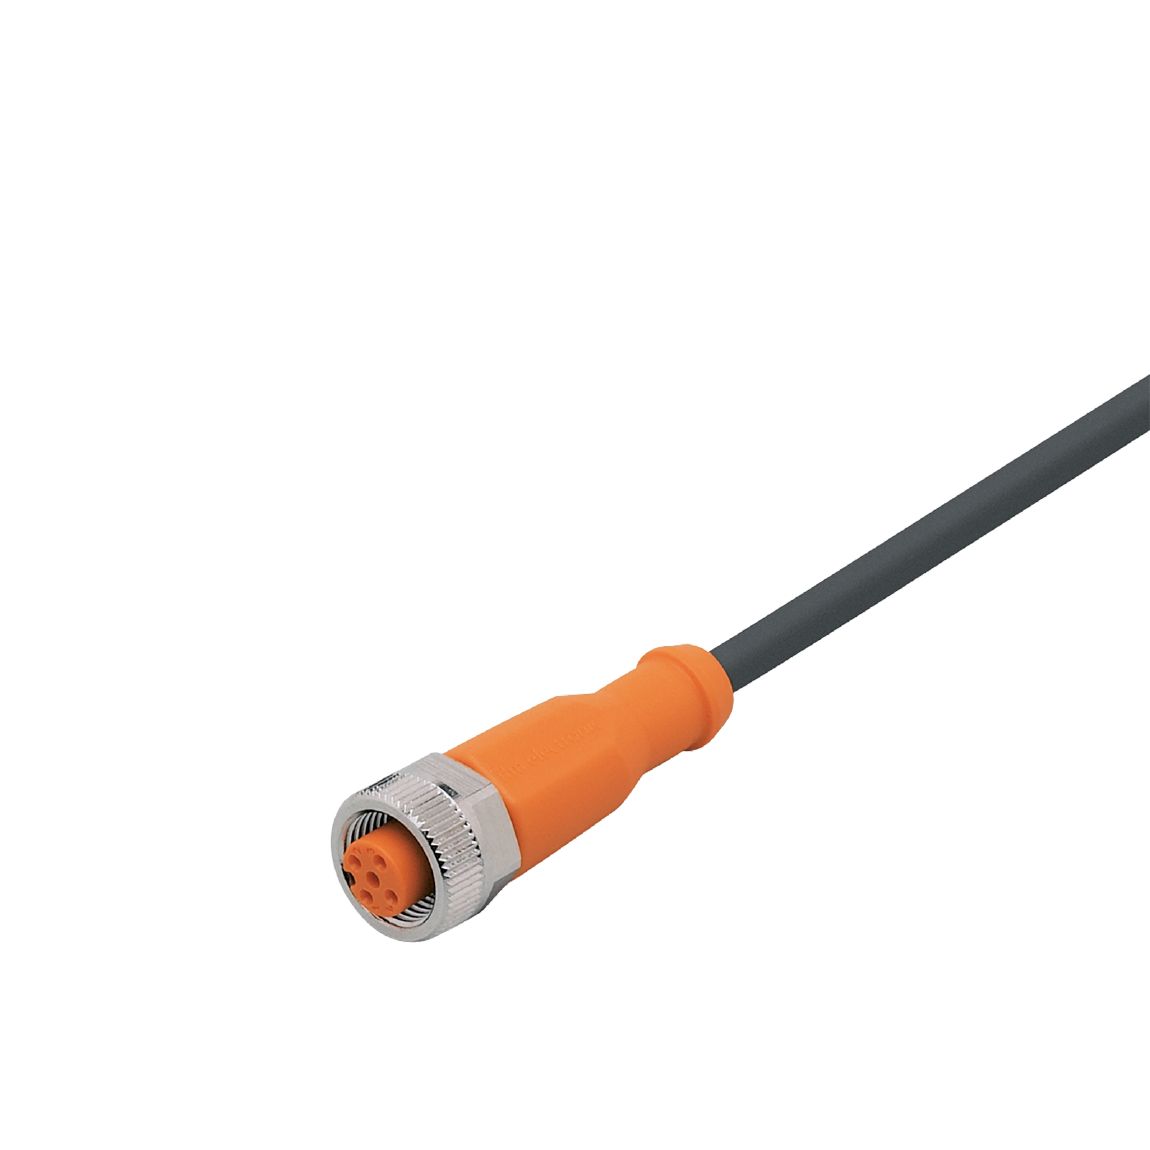 EVC001 - Connecting cable with socket - ifm